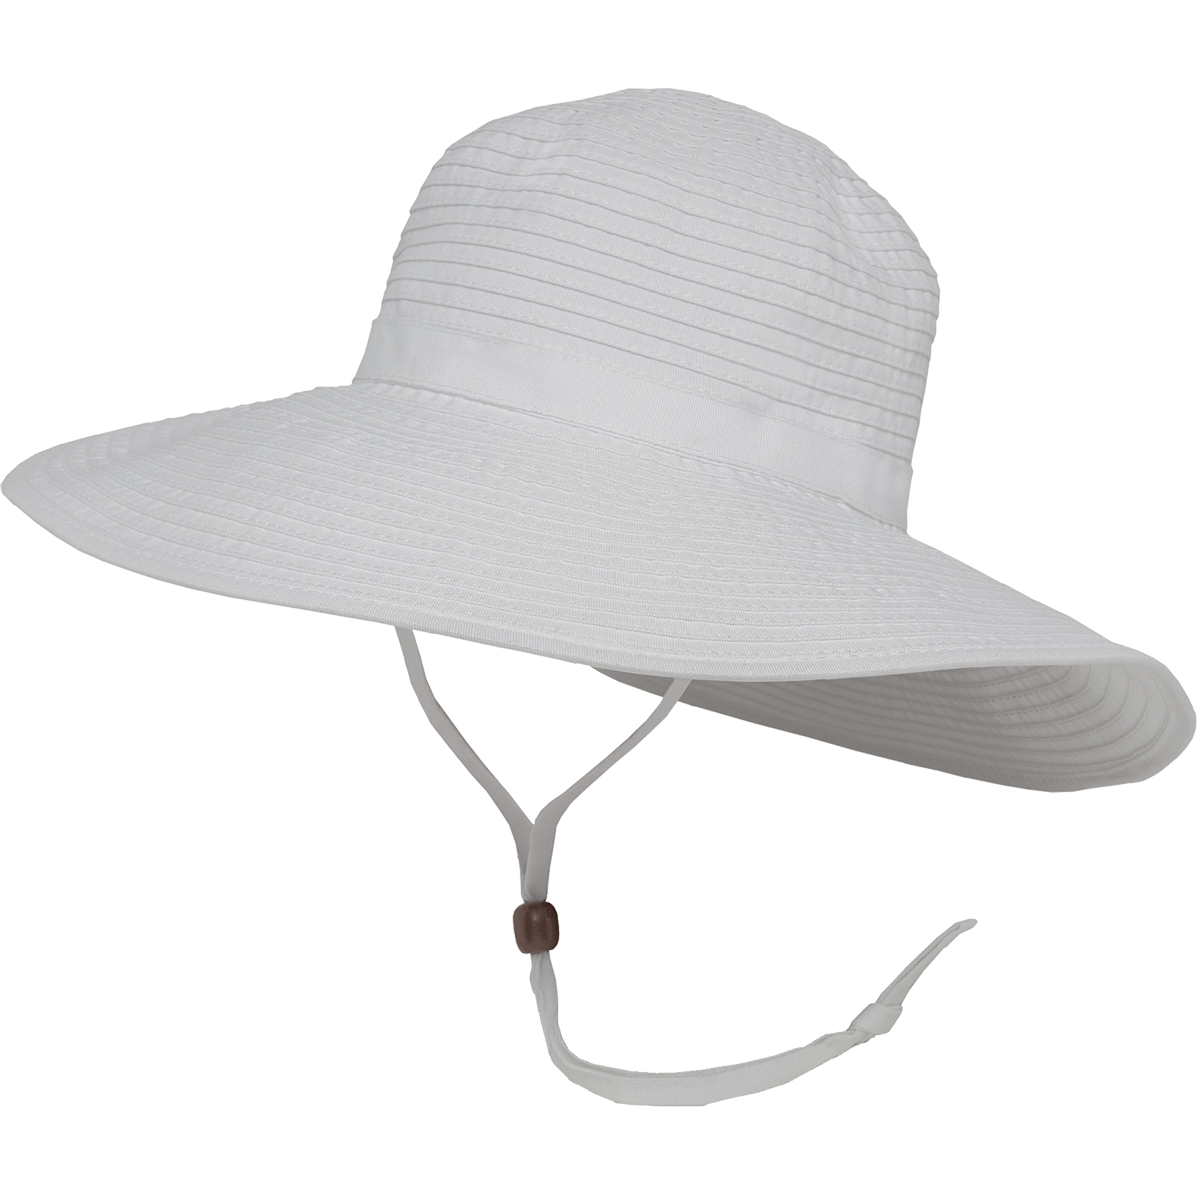 Sunday Afternoons Beach Hat - White